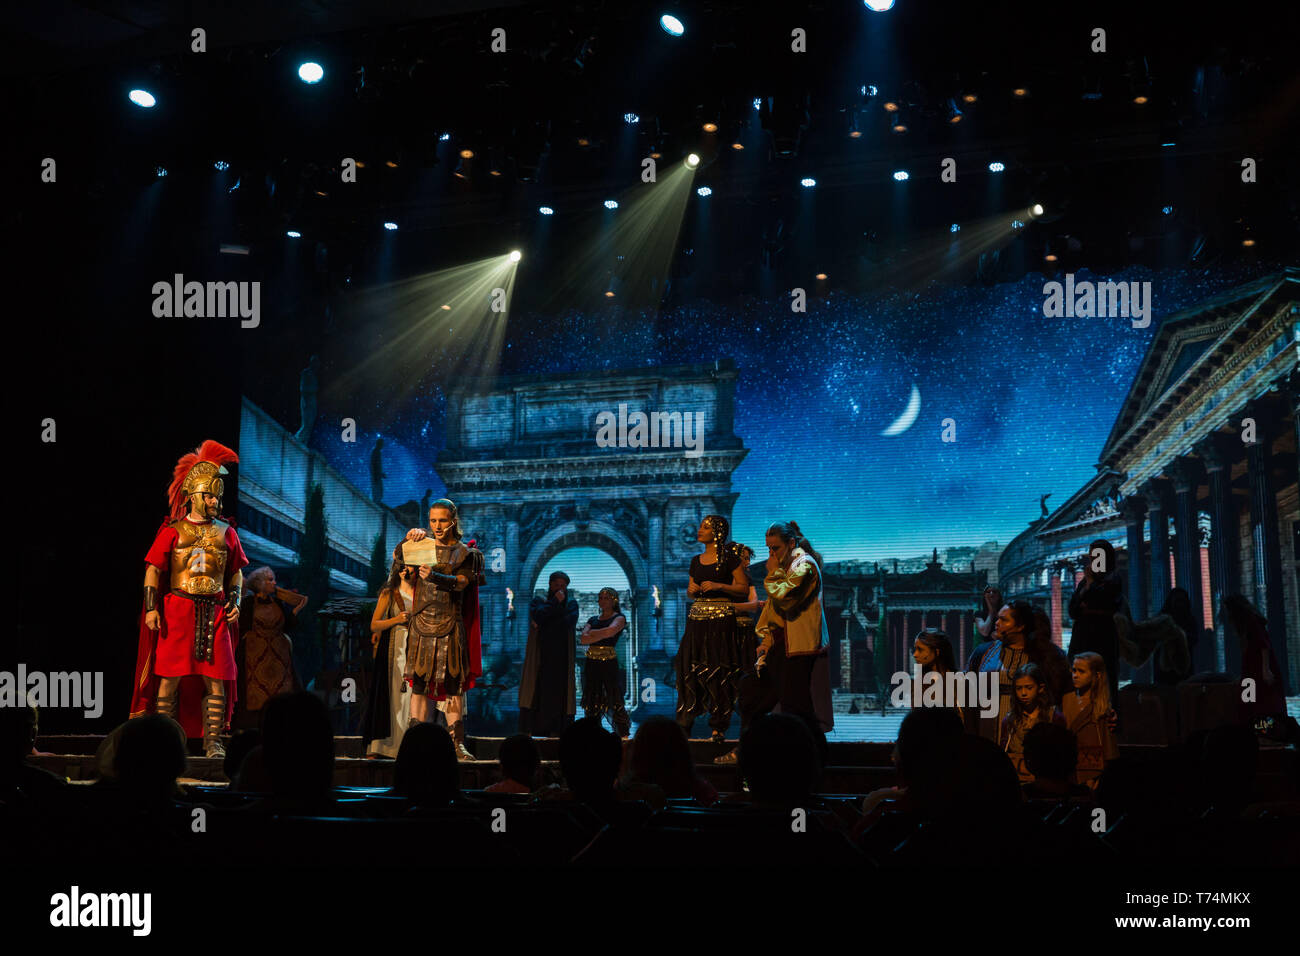 Orlando, Florida, USA. 3rd May, 2019. Actors perform ''The Empire and the Kingdom'' (part one) in the Church of All Nations in The Holy Land Experience (HLE) in Orlando, Florida. The theme park, owned by the Trinity Broadcasting Network, recreates the architecture and themes of the ancient city of Jerusalem in 1st-century Judea. HLE is a non-denominational Christian living biblical museum and church. The park opened in February 2001. There are multiple live performances given throughout the day in various locations in the park. Credit: Tracy Barbutes/ZUMA Wire/Alamy Live News Stock Photo